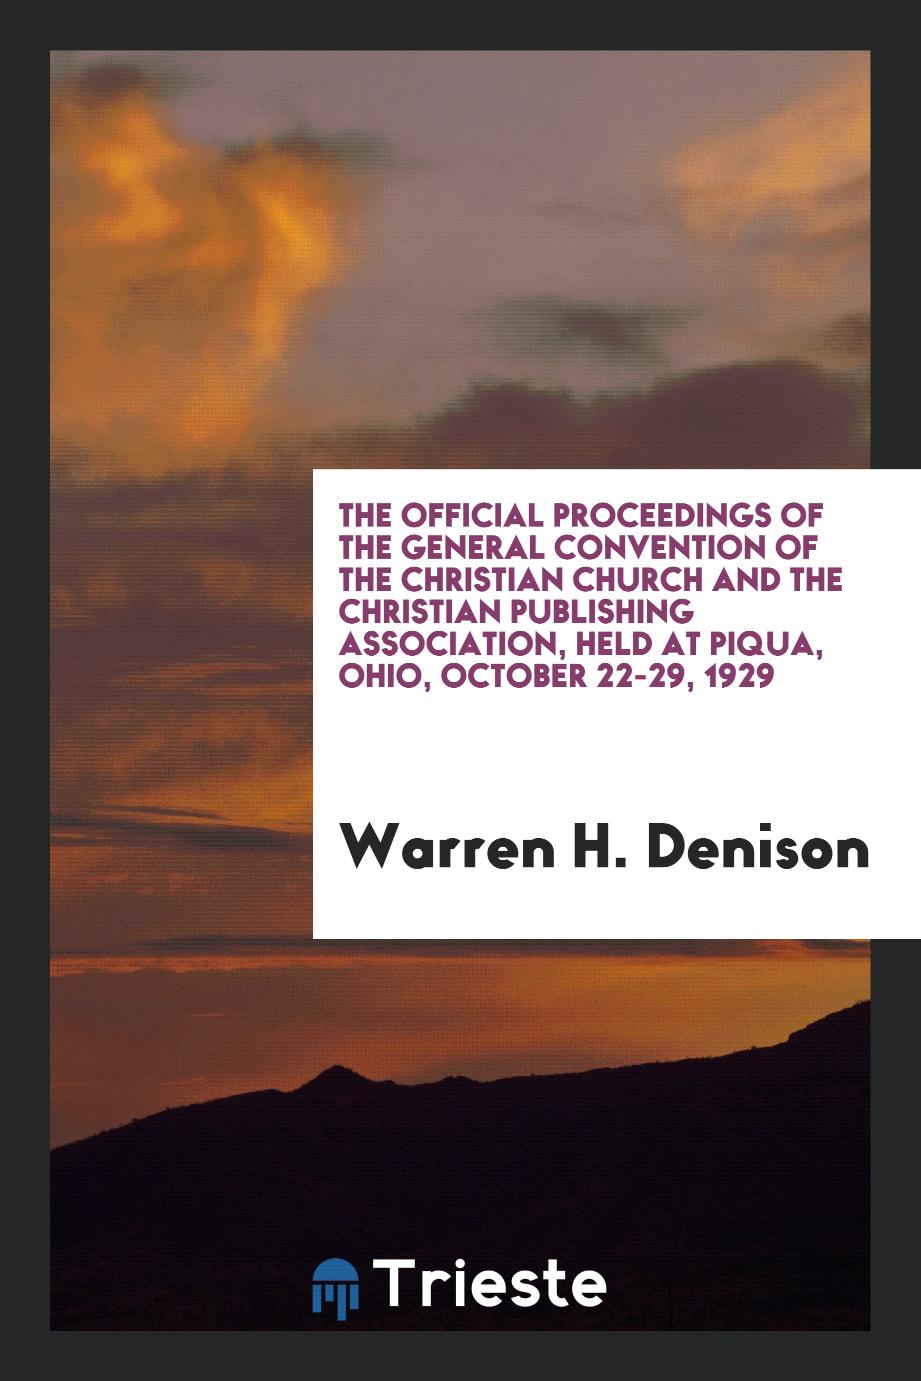 The Official proceedings of the General Convention of the Christian Church and the Christian Publishing Association, held at Piqua, Ohio, October 22-29, 1929